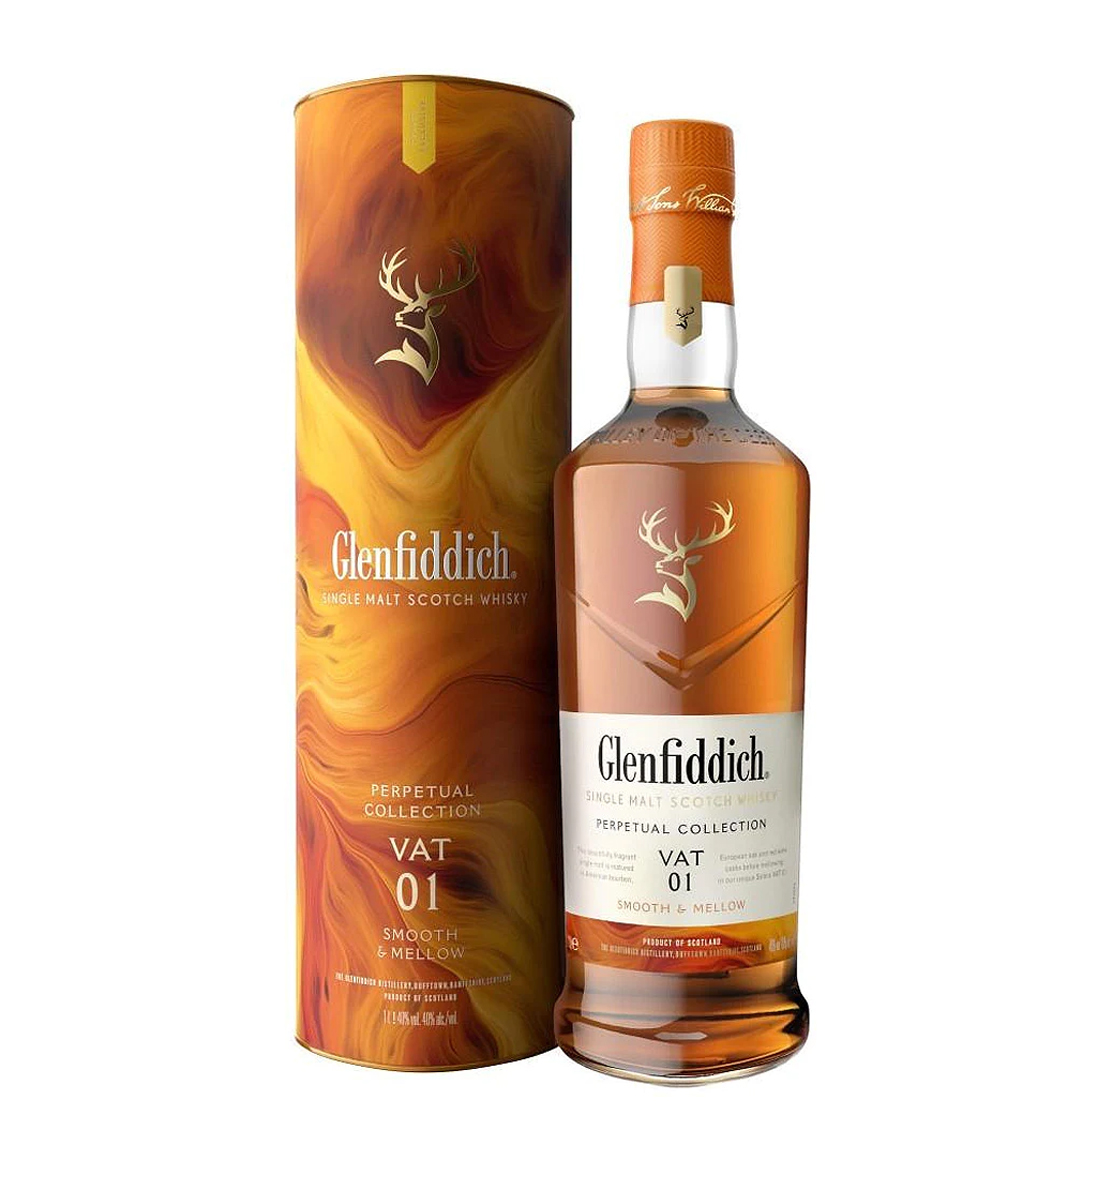 Glenfiddich Perpetual Collection Vat 1 Smooth and Mellow Speyside Single Malt Scotch Whisky 1L